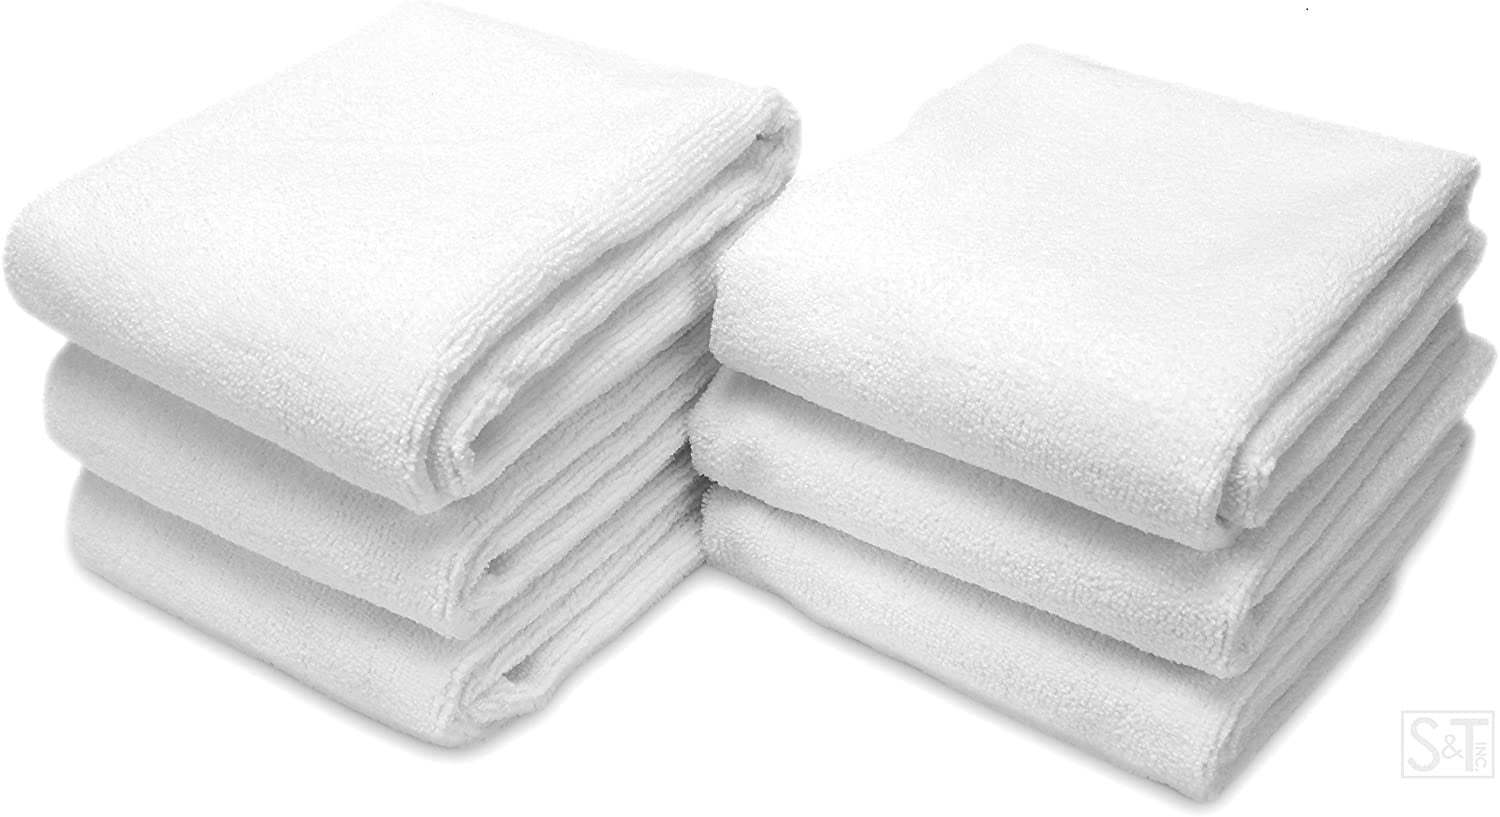 ANMINY Large Microfiber Bath Towels Soft Absorbent Towel for Gym Spa Shower  Beach Travel Body Wrap Towel, Blue 